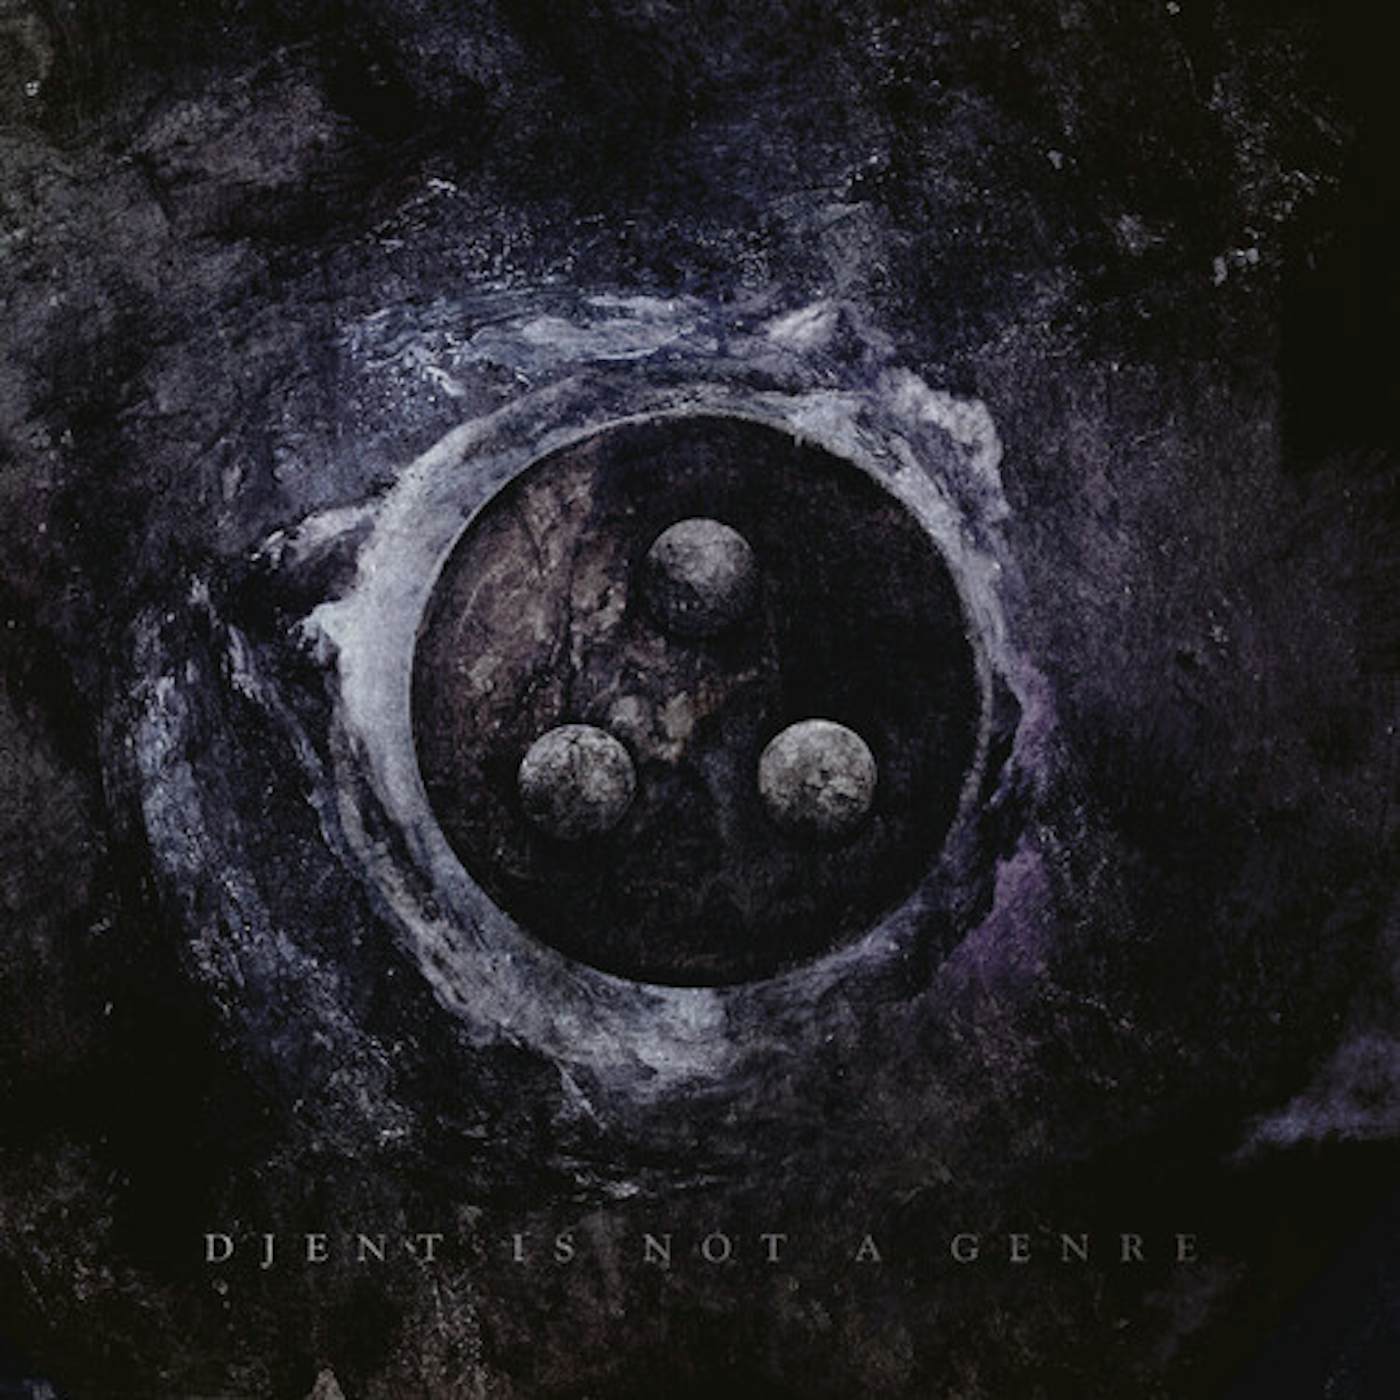 Periphery V: Djent Is Not A Genre - Blue/White Vinyl Record